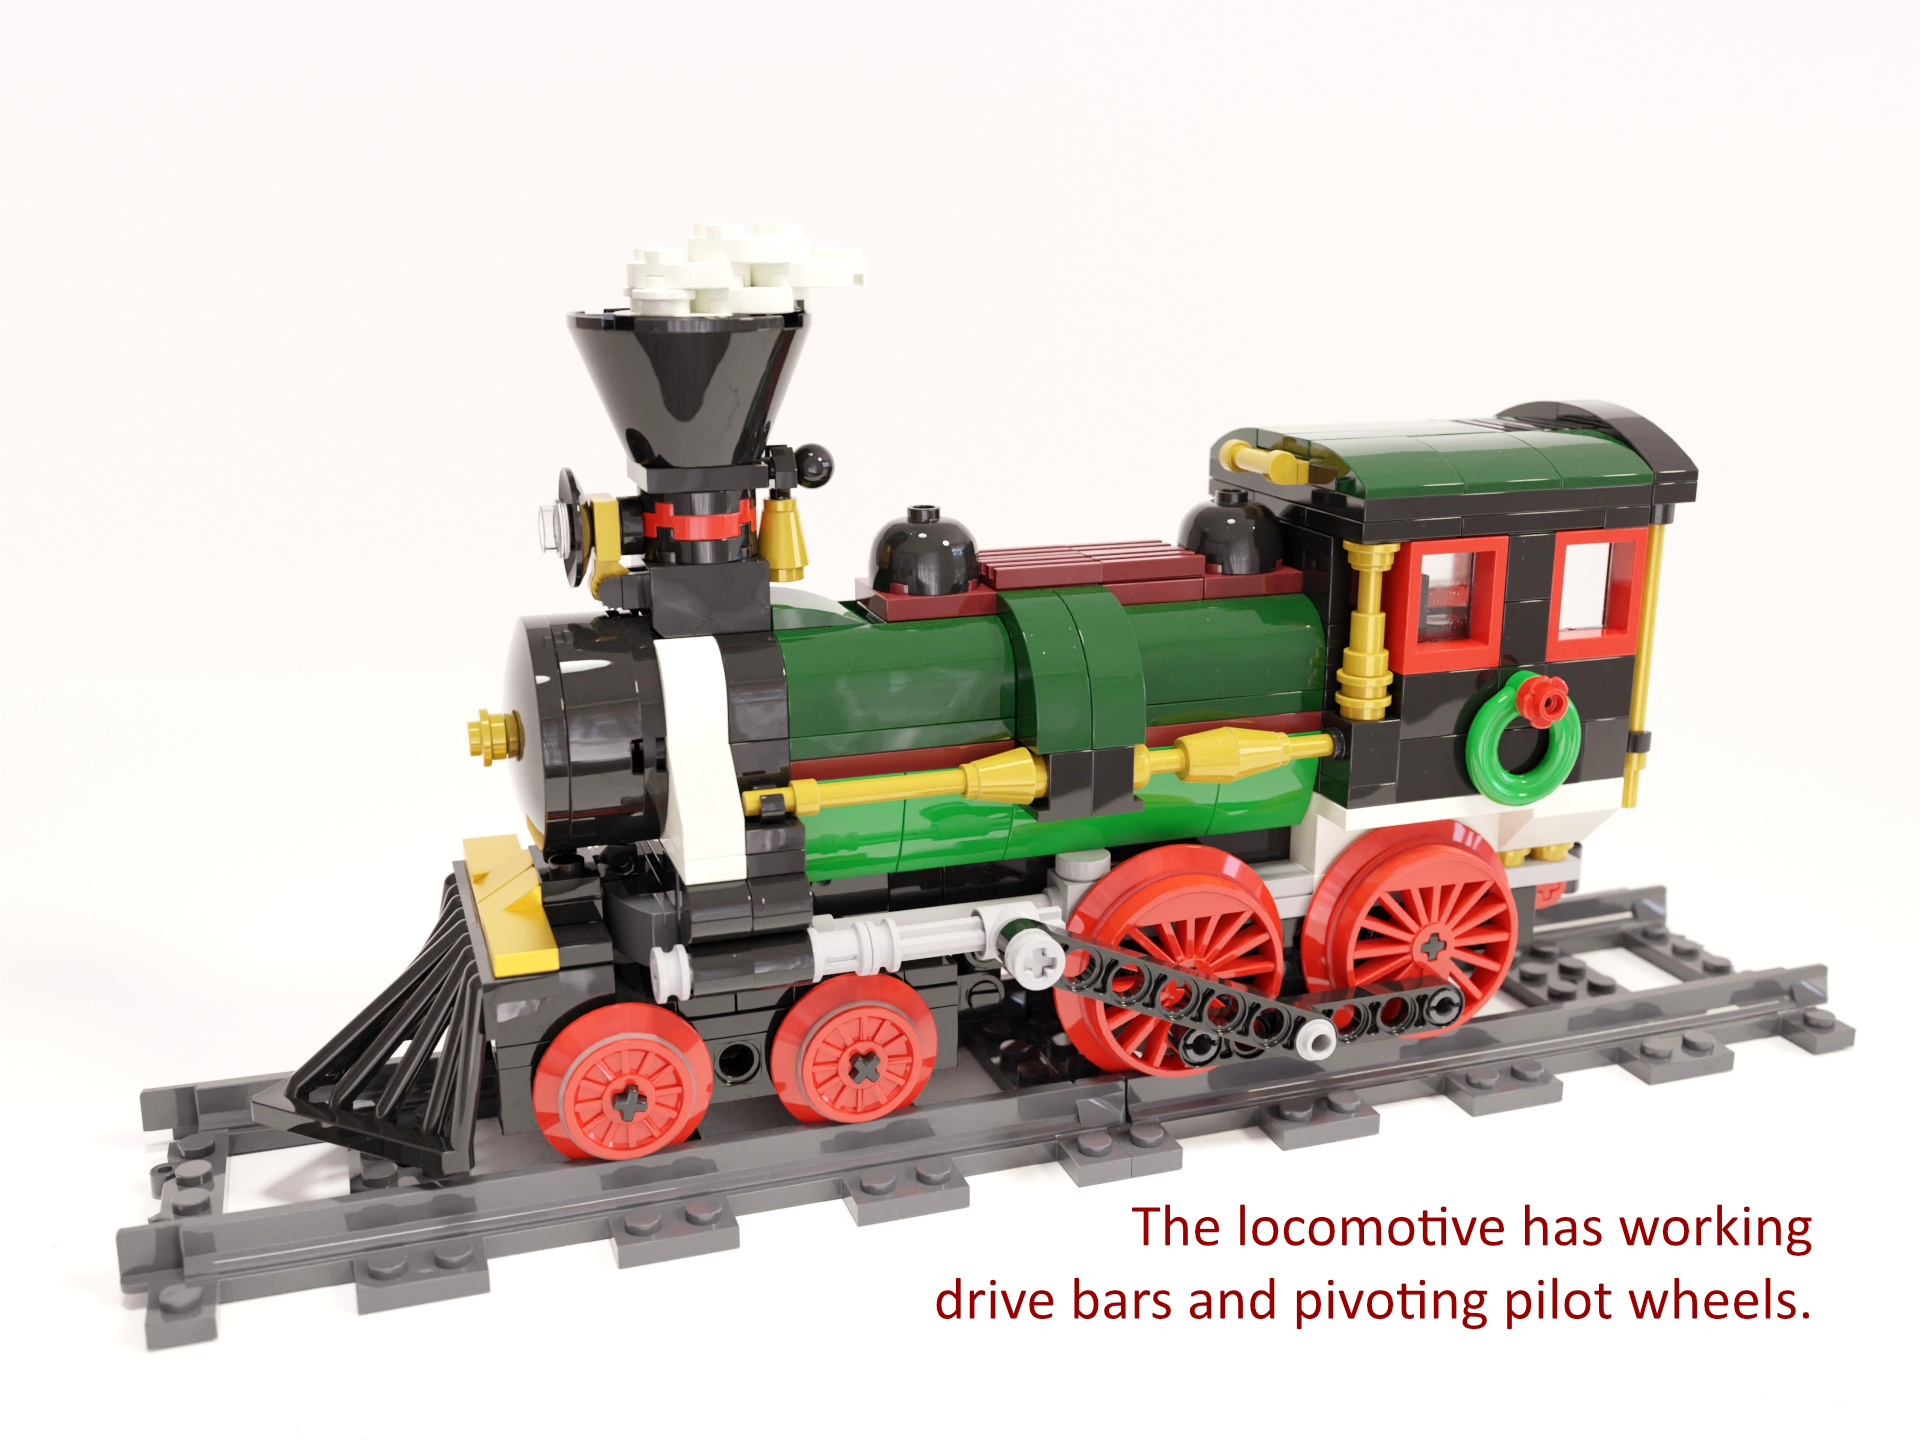 Picture 1: The locomotive has working drive bars and piloting pilot wheels